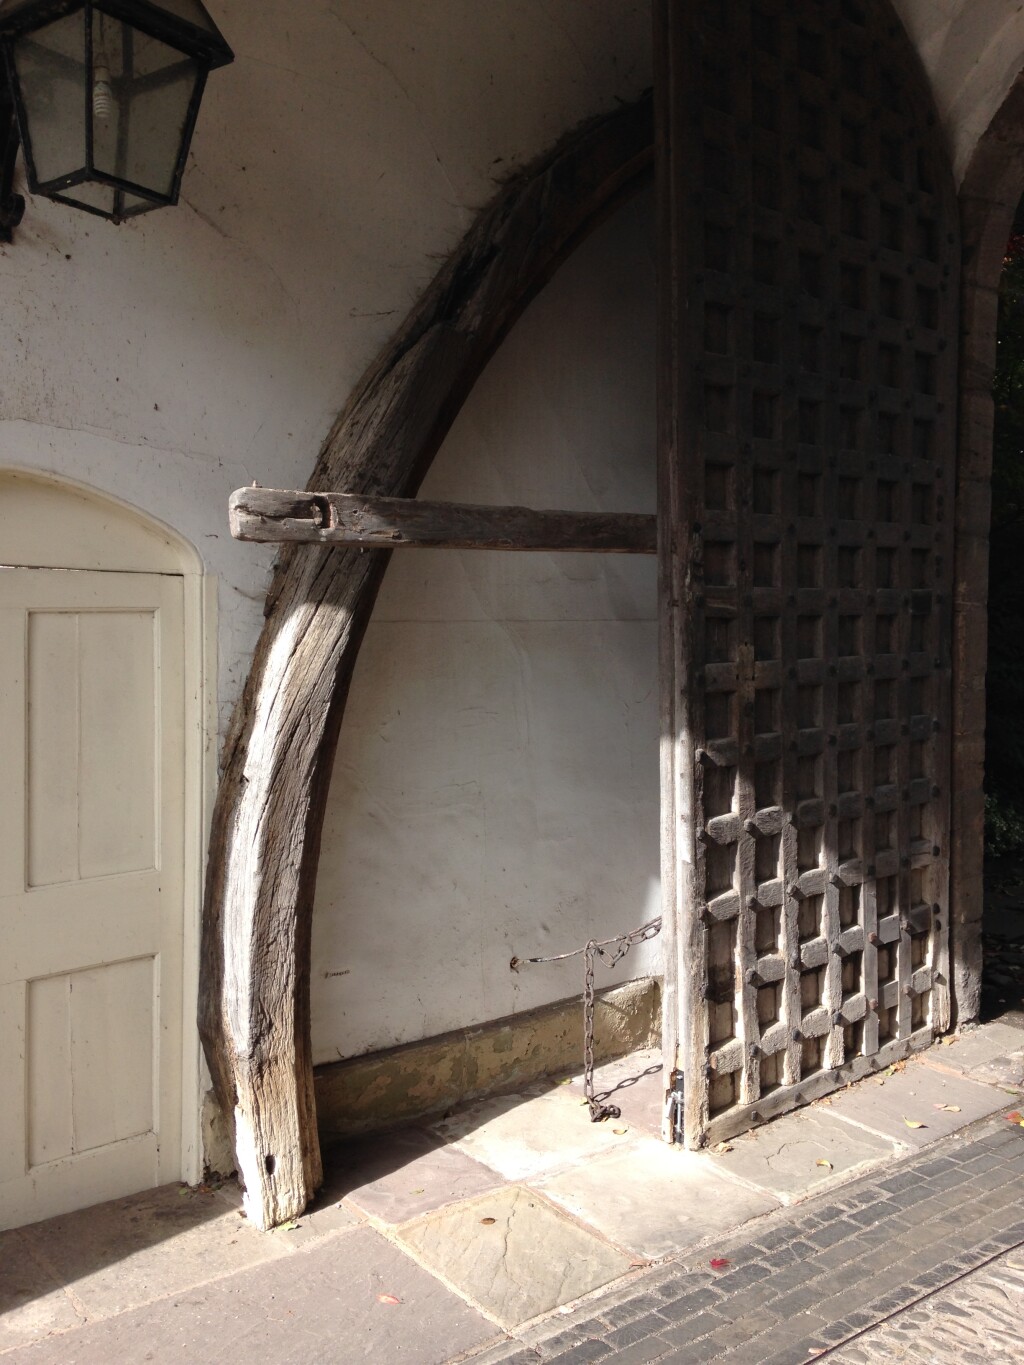 A wooden arched brace leaning against the wall of a porch